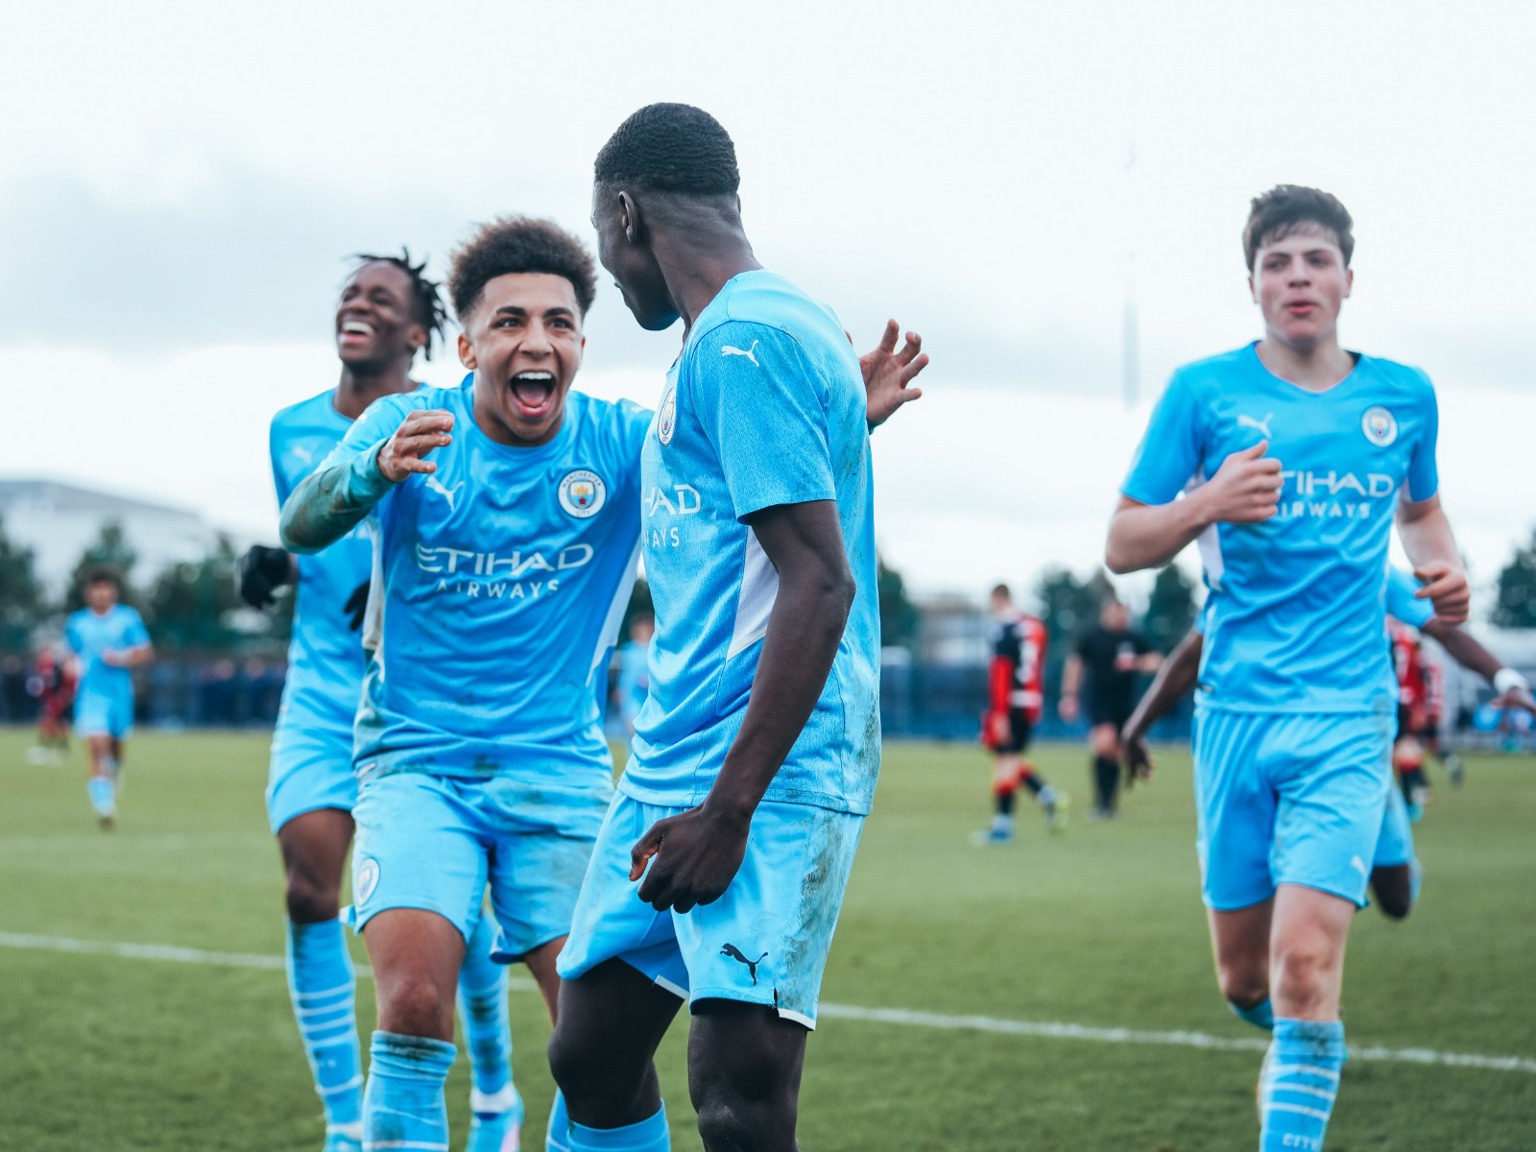 City Under-18s romp to victory over Blackburn to go top